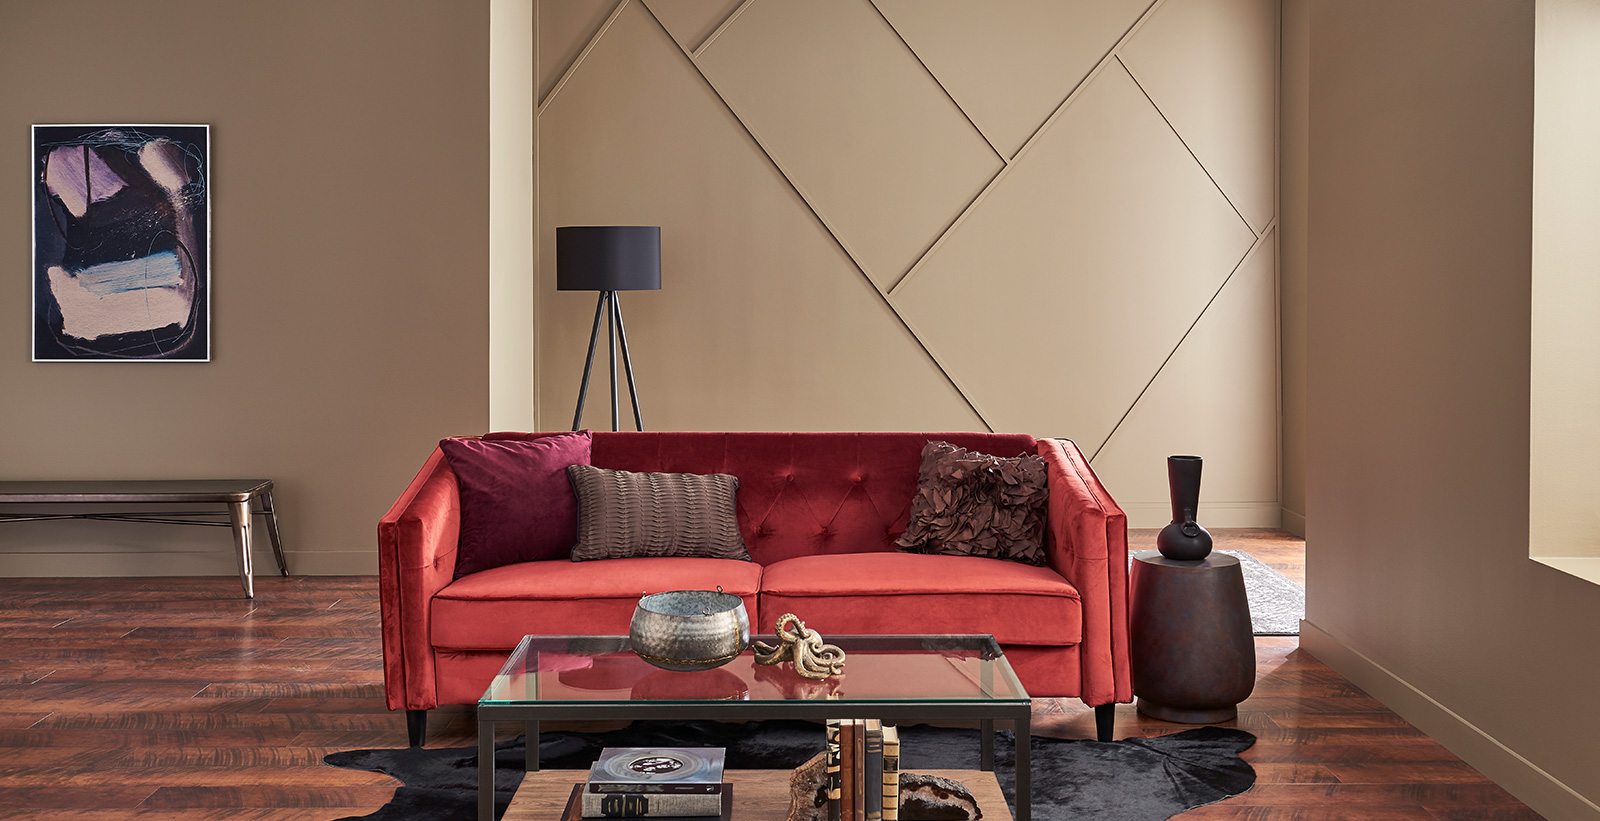 Monochromatic living room with taupe on walls, red tufted couch, glass coffee table, and dark wood flooring